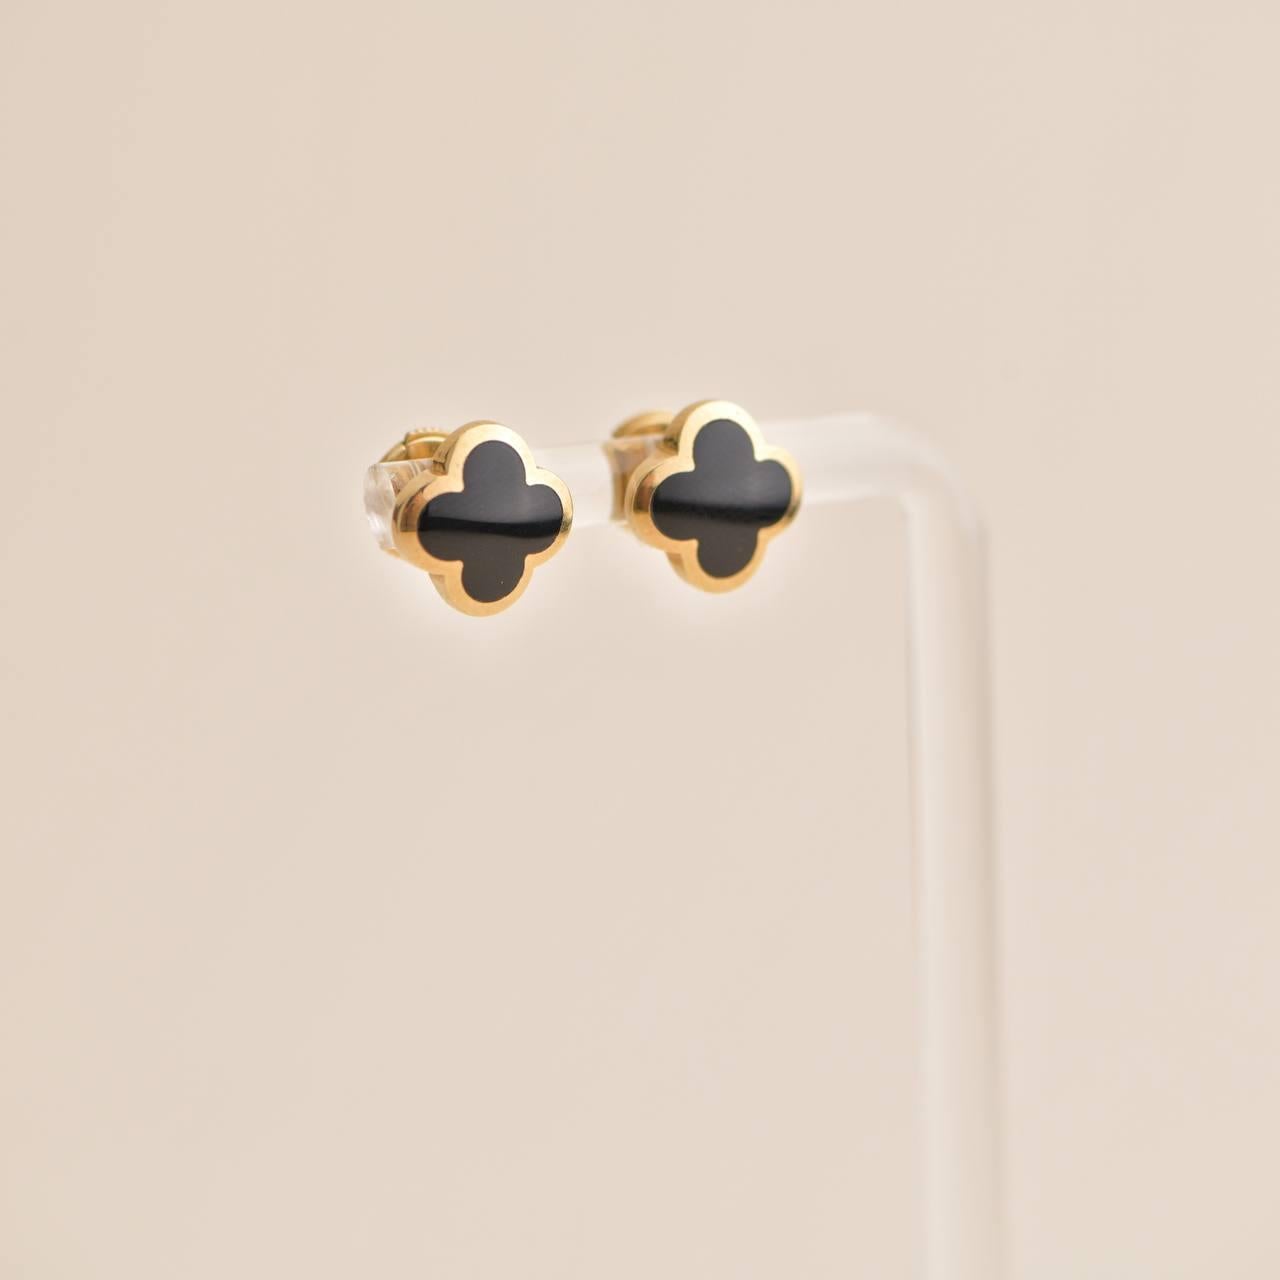 Van Cleef & Arpels Pure Alhambra Onyx Yellow Gold Stud Earrings In Excellent Condition For Sale In Banbury, GB